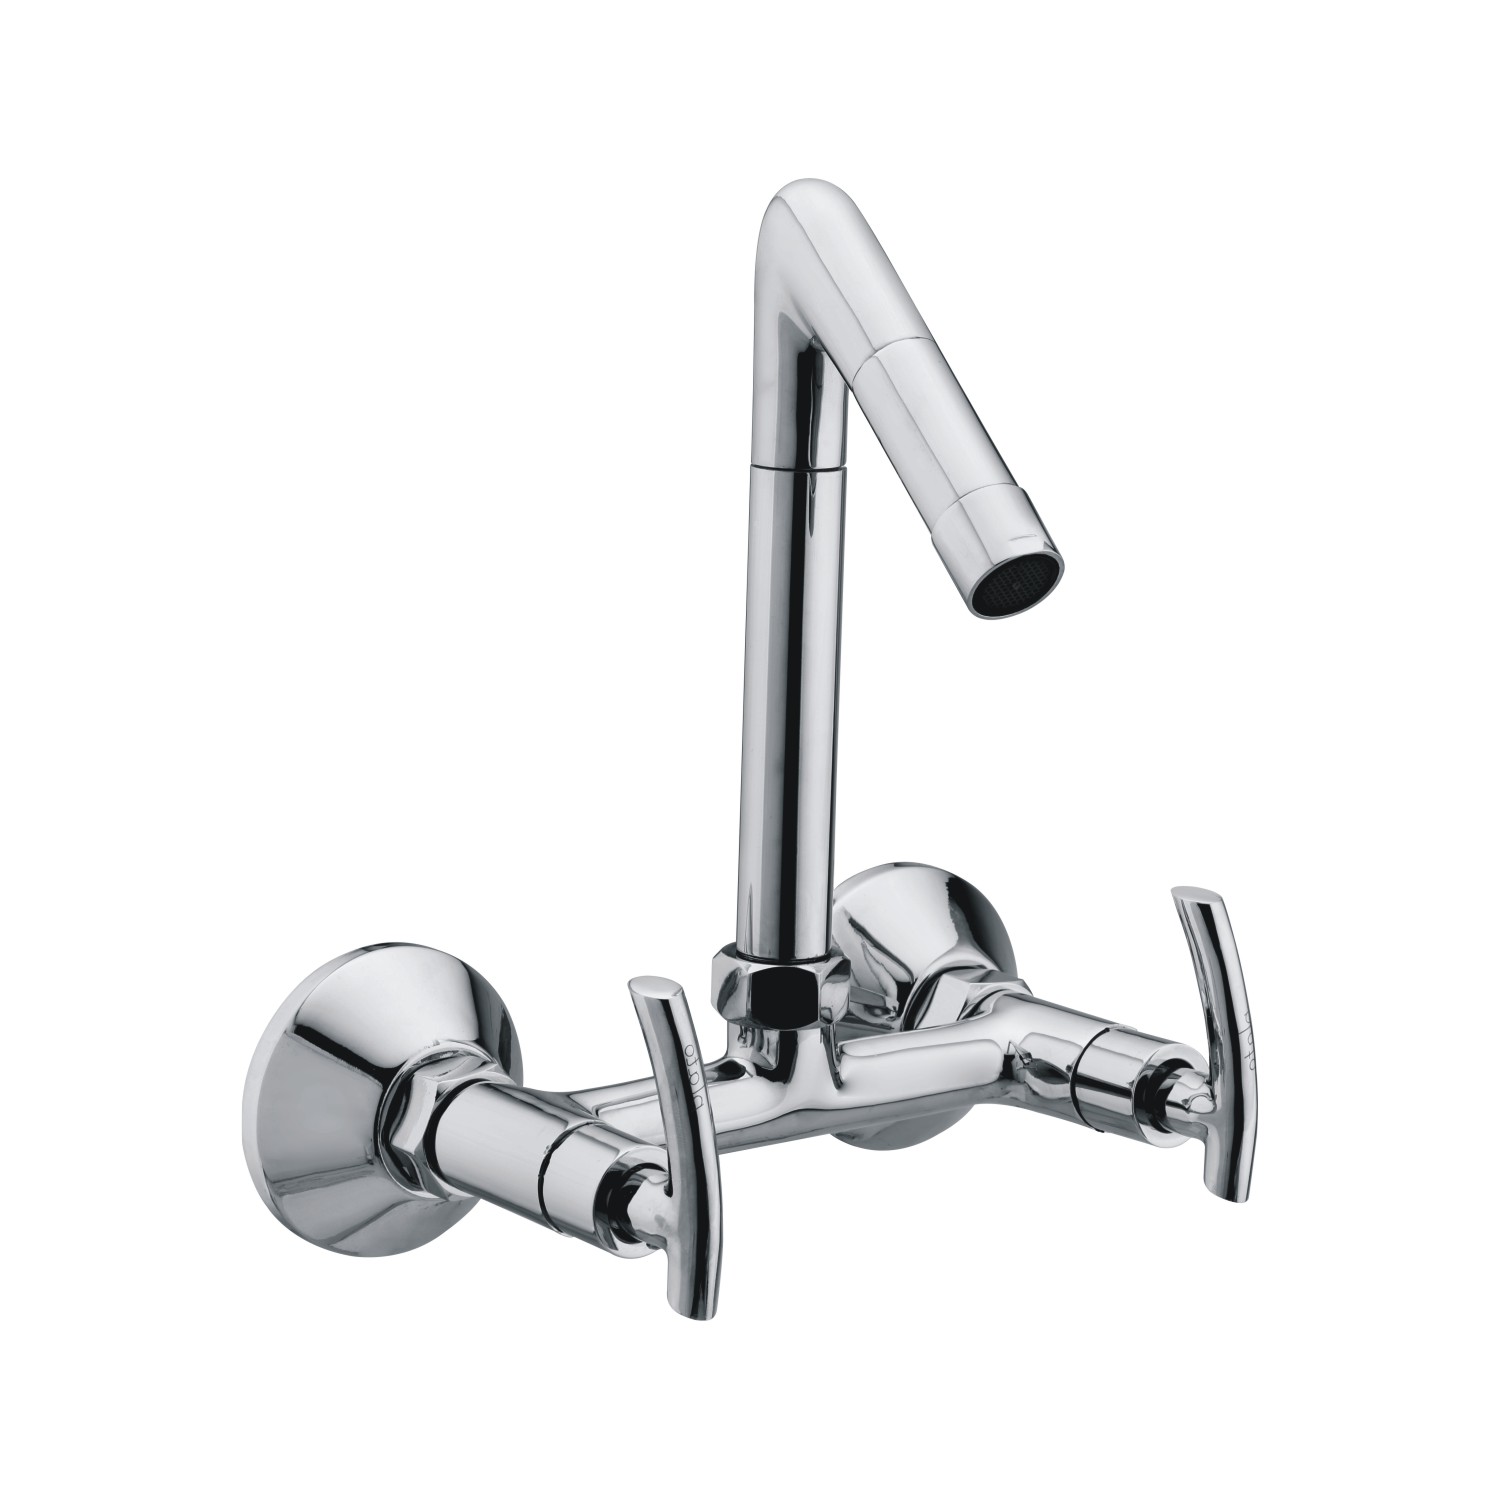 Specto Sink Mixer with Swivel Spout